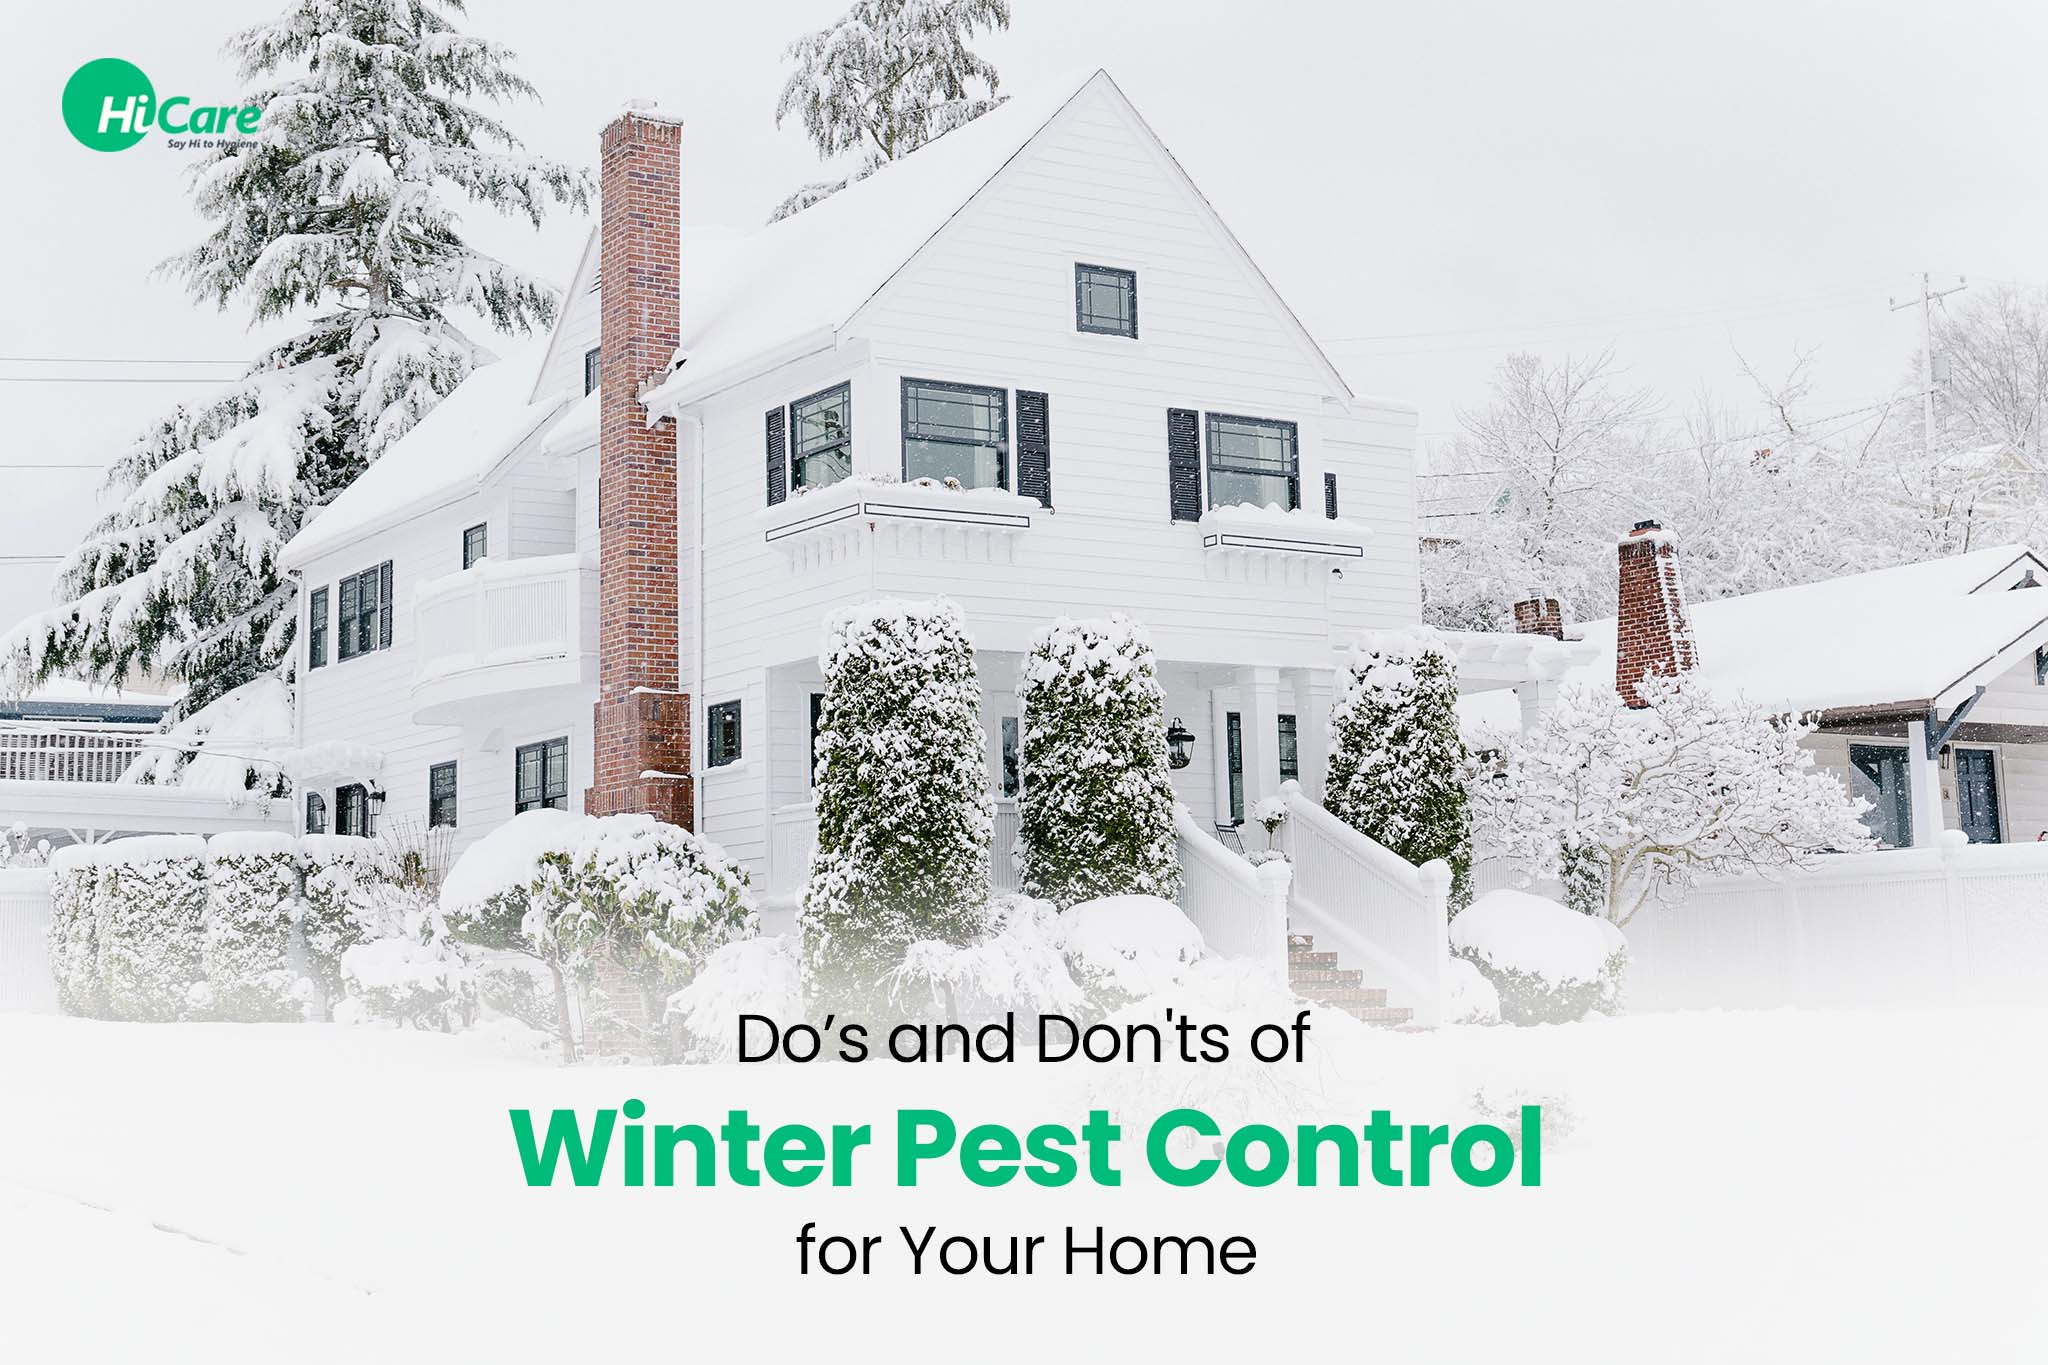 Dos and Don’ts of Winter Pest Control for Your Home